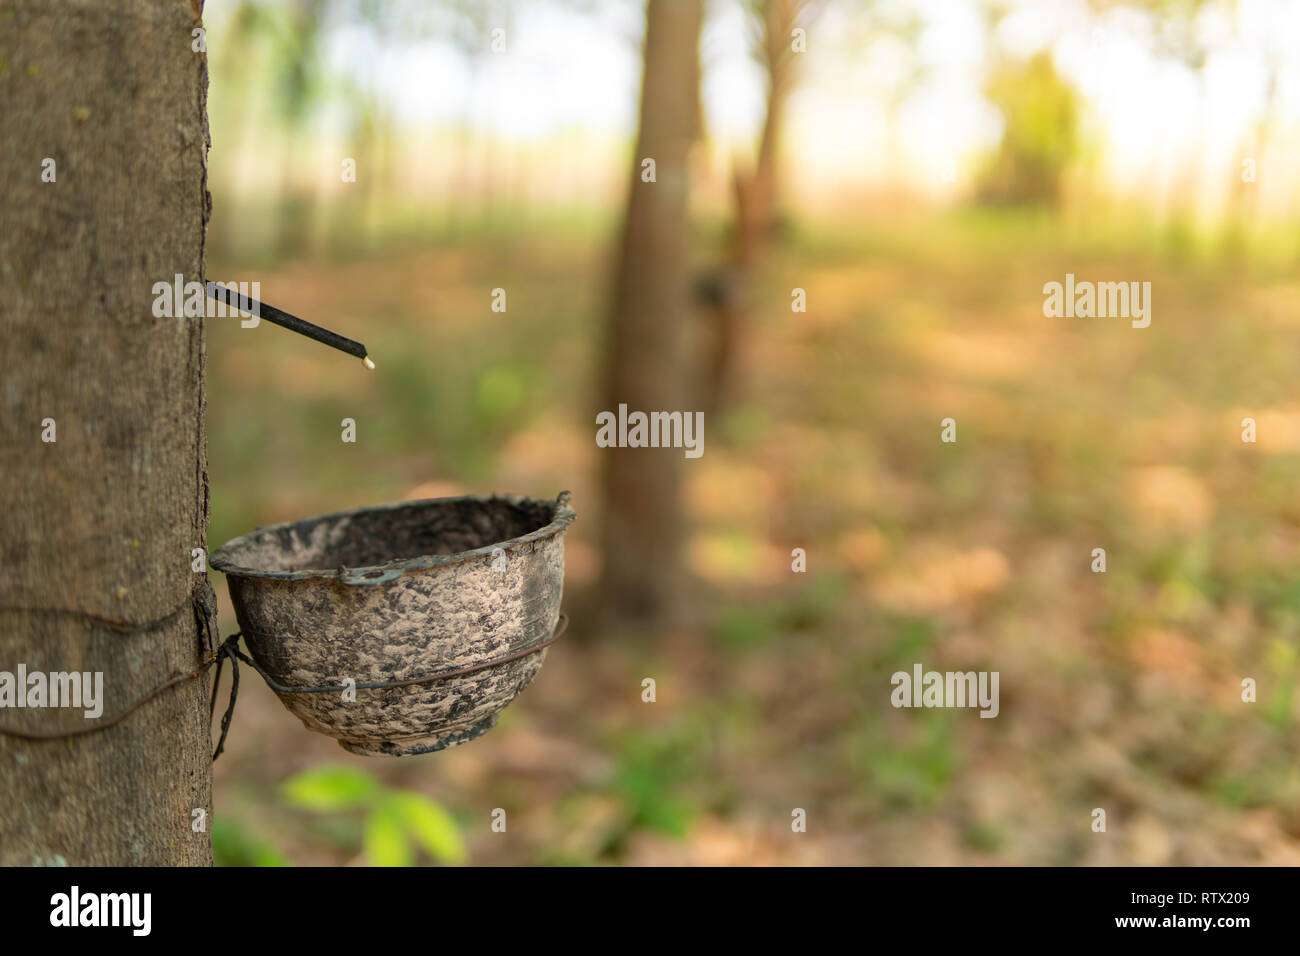 Tapping latex rubber tree, Rubber Latex extracted from rubber tree. Stock Photo